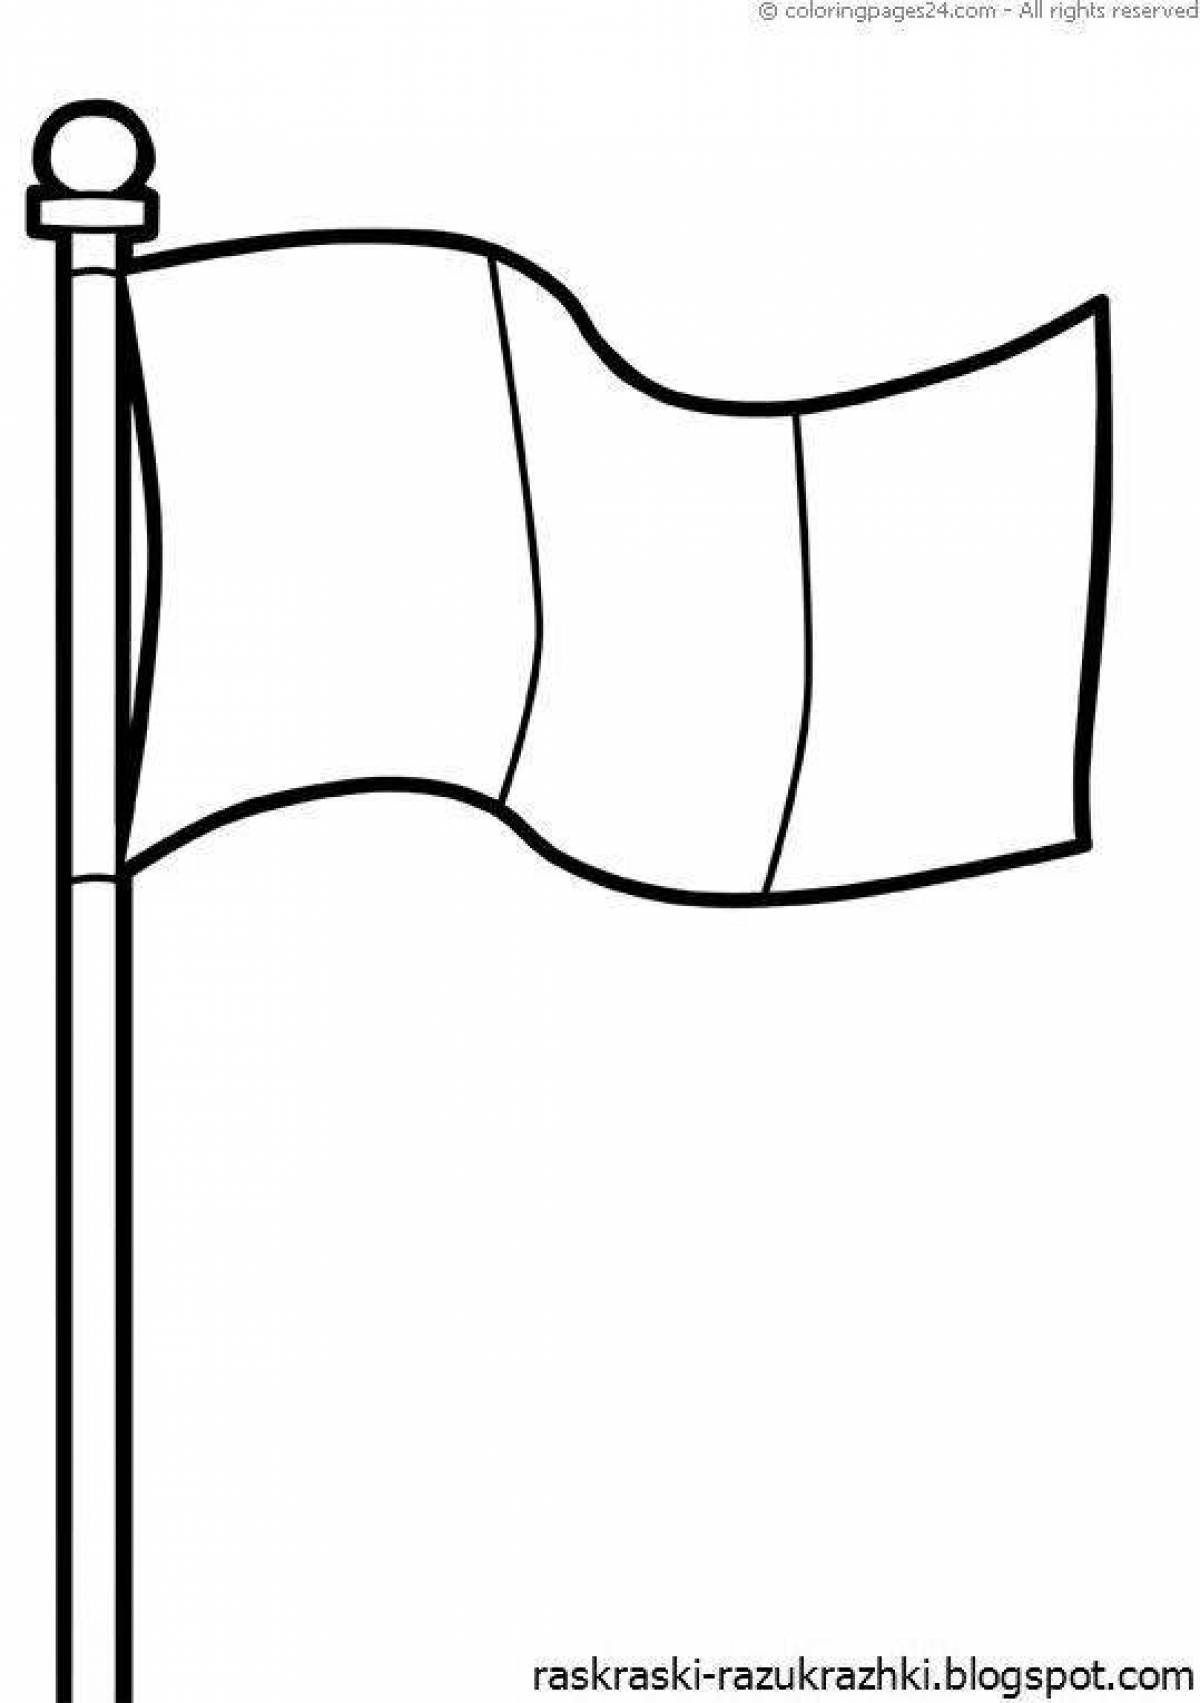 Coloring page glorious france flag